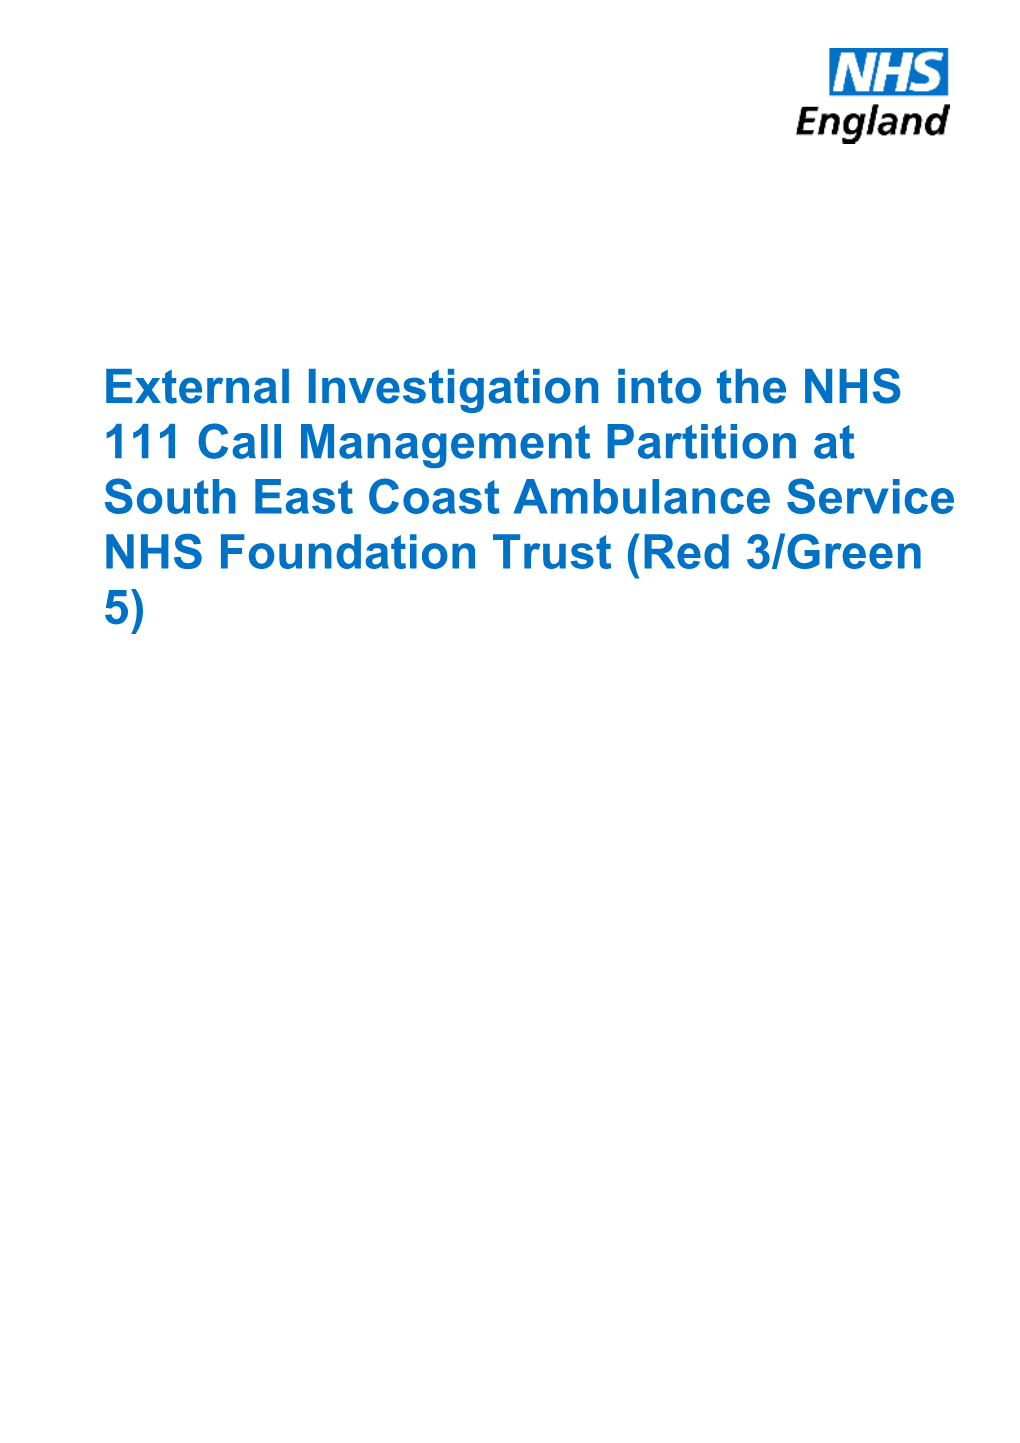 External Investigation Into NHS 111 Call Management Partition Pilot Project at South East Coast Ambulance Service NHS Foundation Trust (Red 3/Green 5)